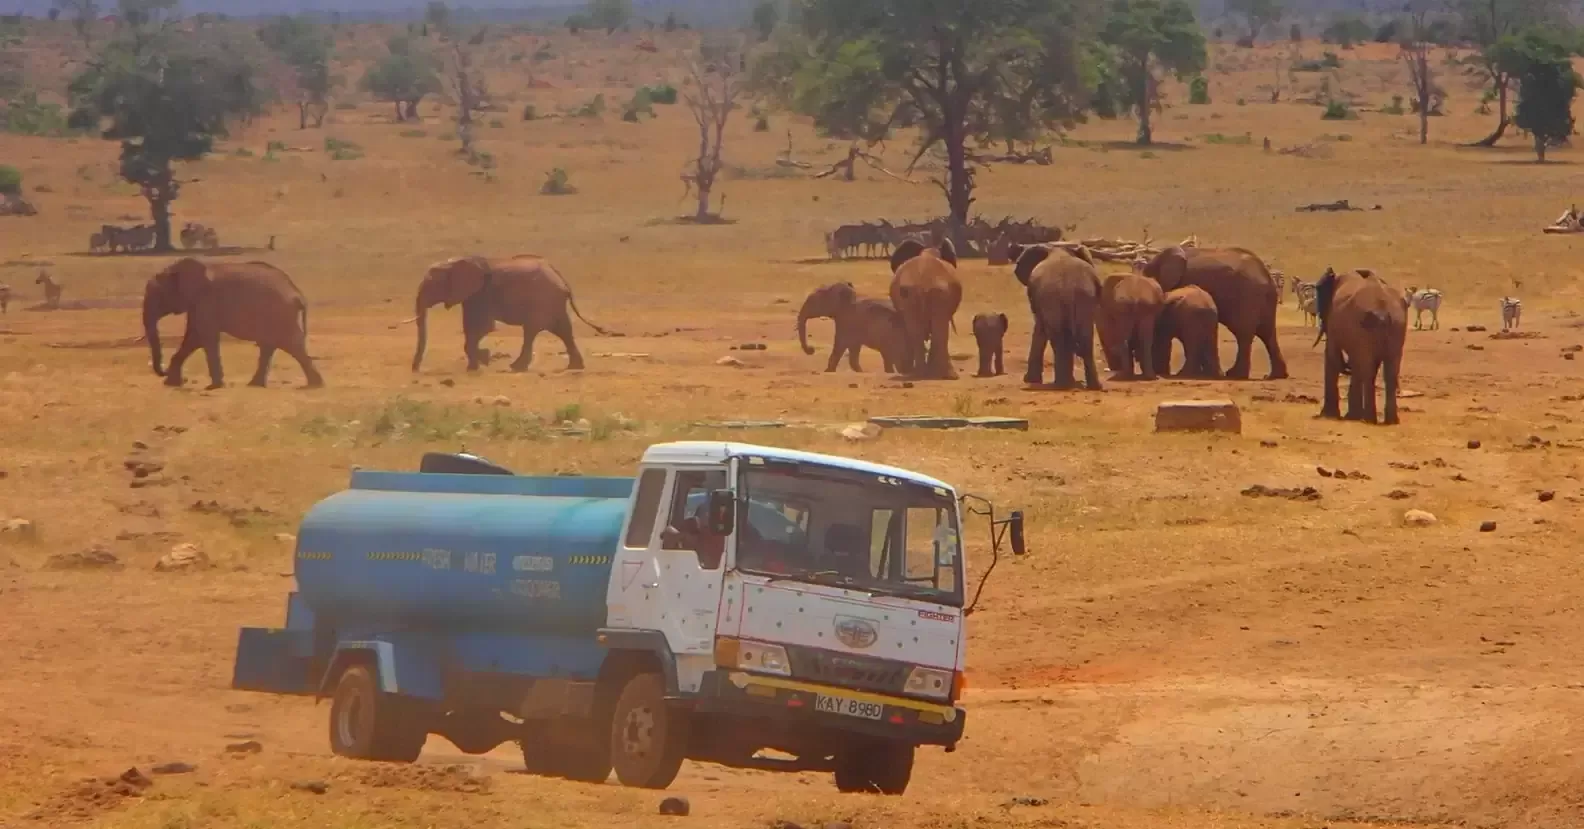 A man travels for hours daily through a drought to provide water for wild animals 4